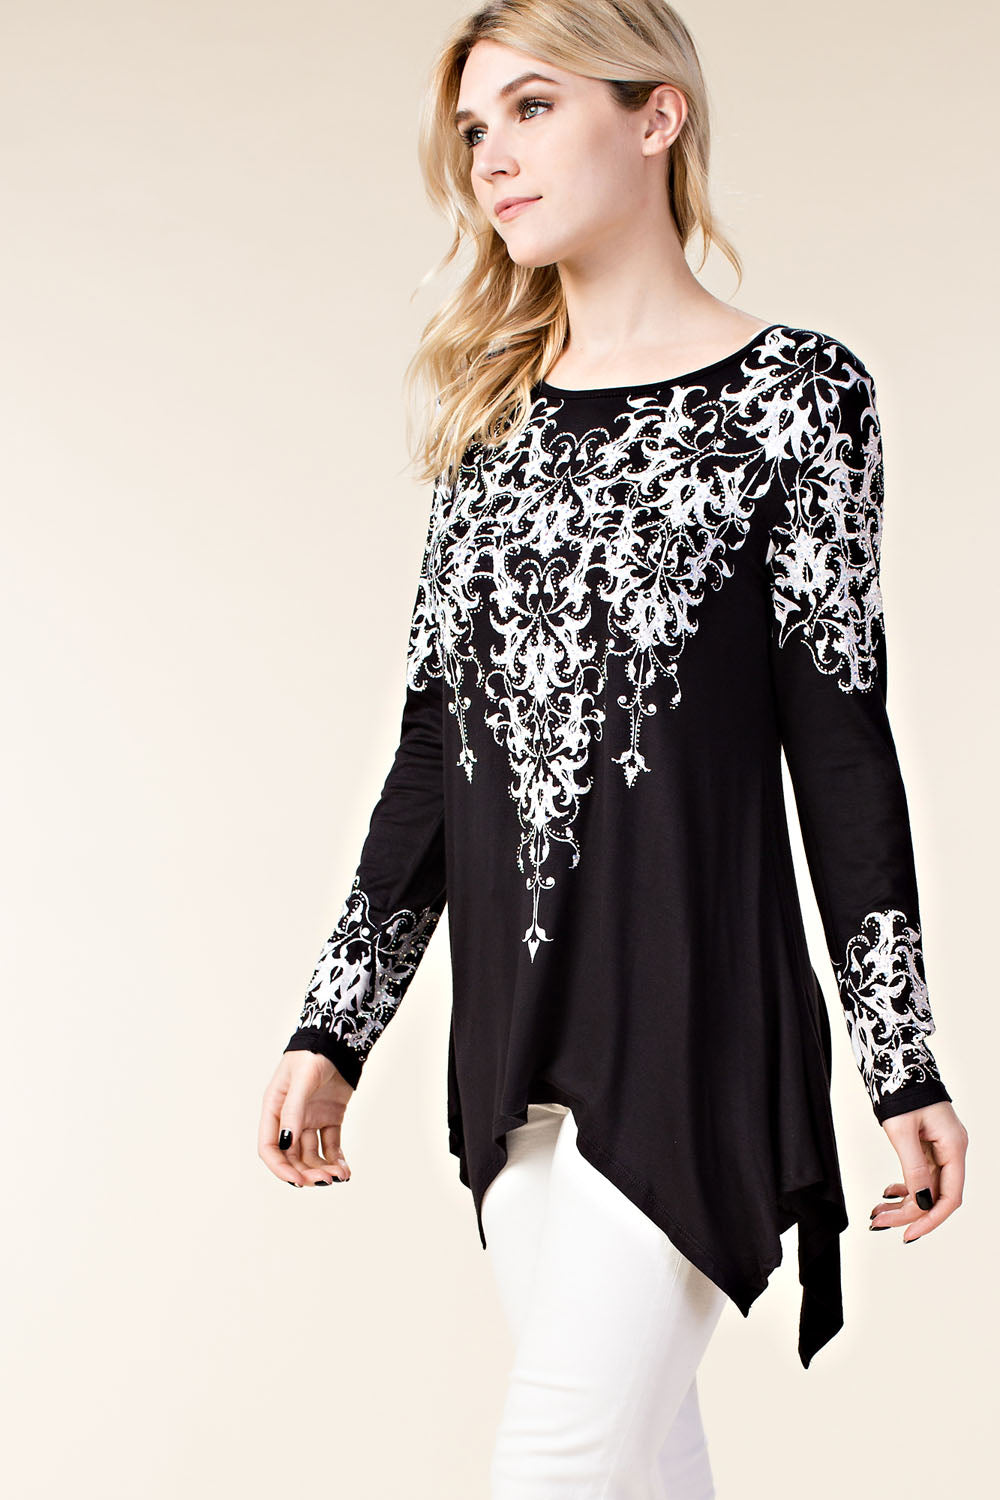 Women's Long sleeve with print and stones Graphic Print Black & White Tunic L/S Shirt Embellished in Rhinestones